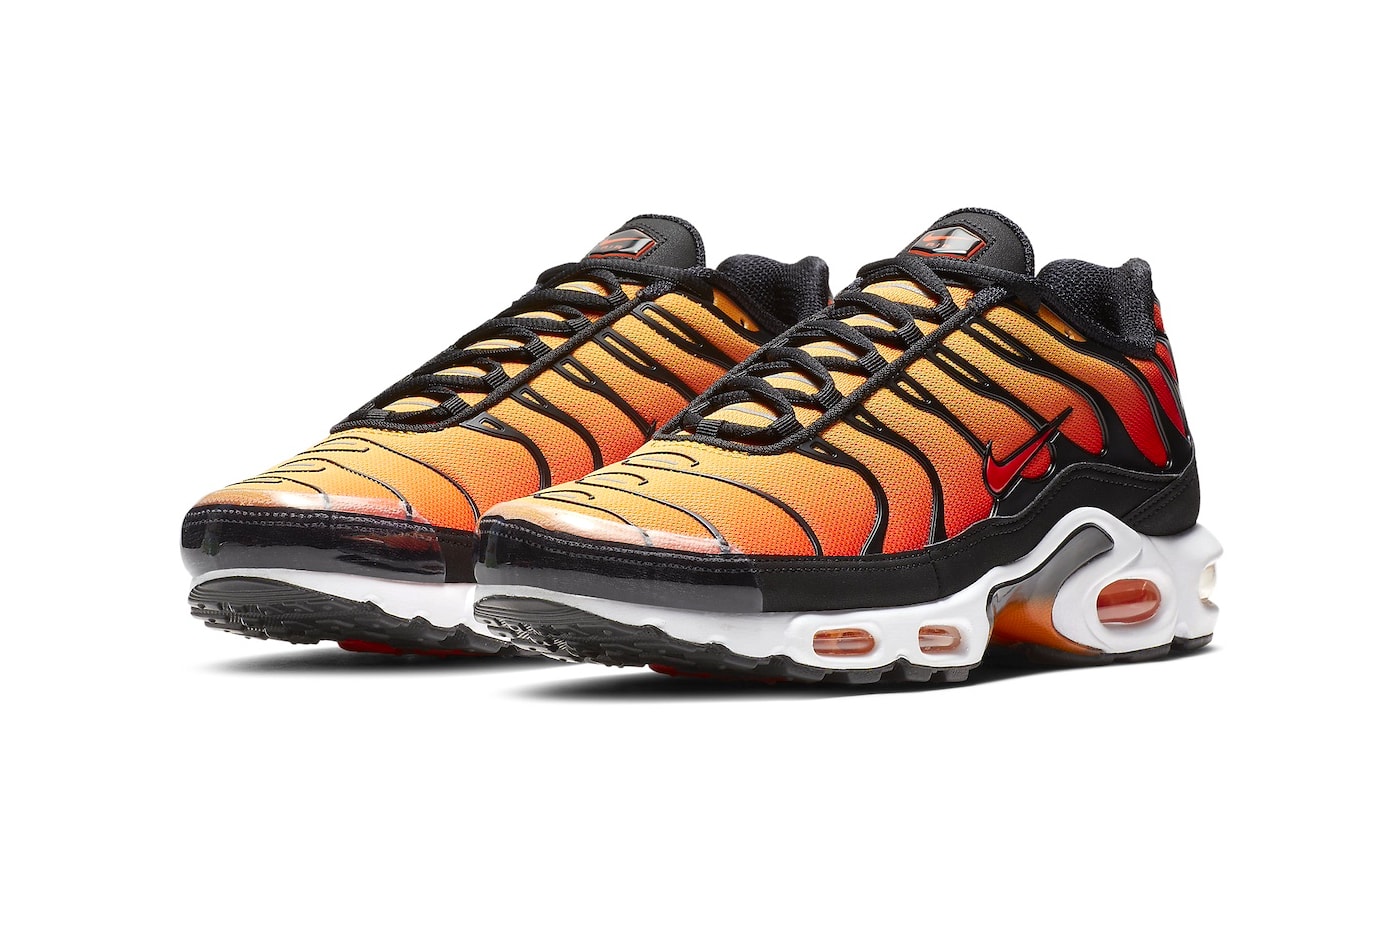 This OG Nike Air Max Plus Is Returning